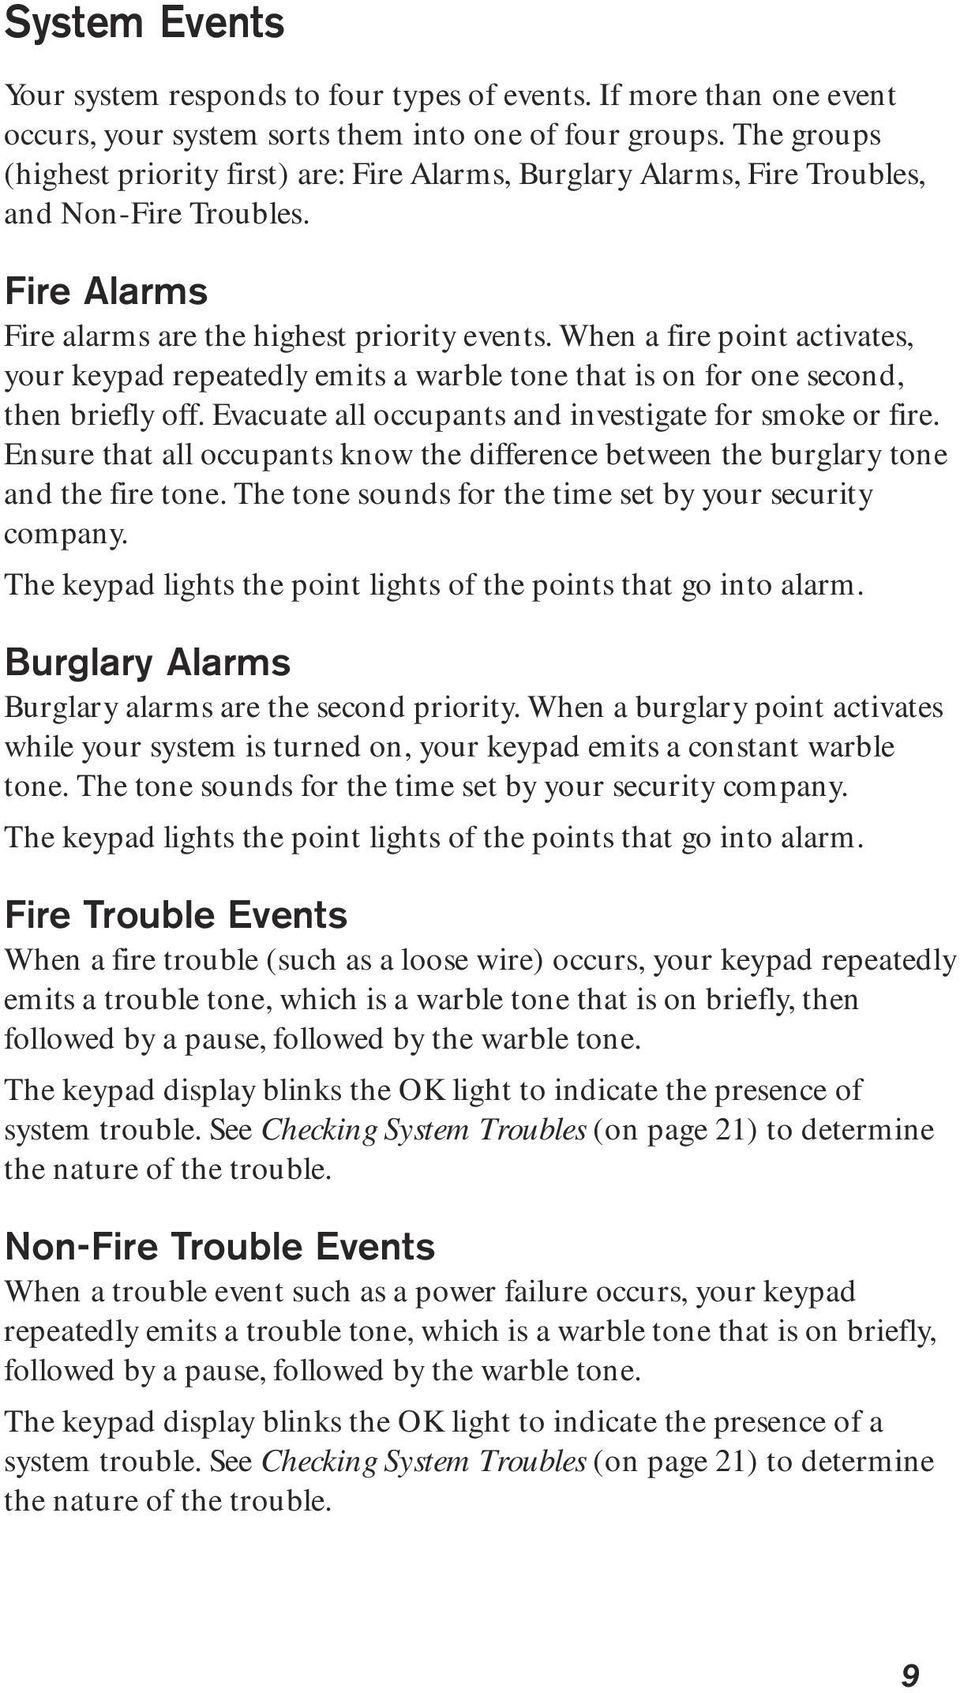 When a fire point activates, your keypad repeatedly emits a warble tone that is on for one second, then briefly off. Evacuate all occupants and investigate for smoke or fire.